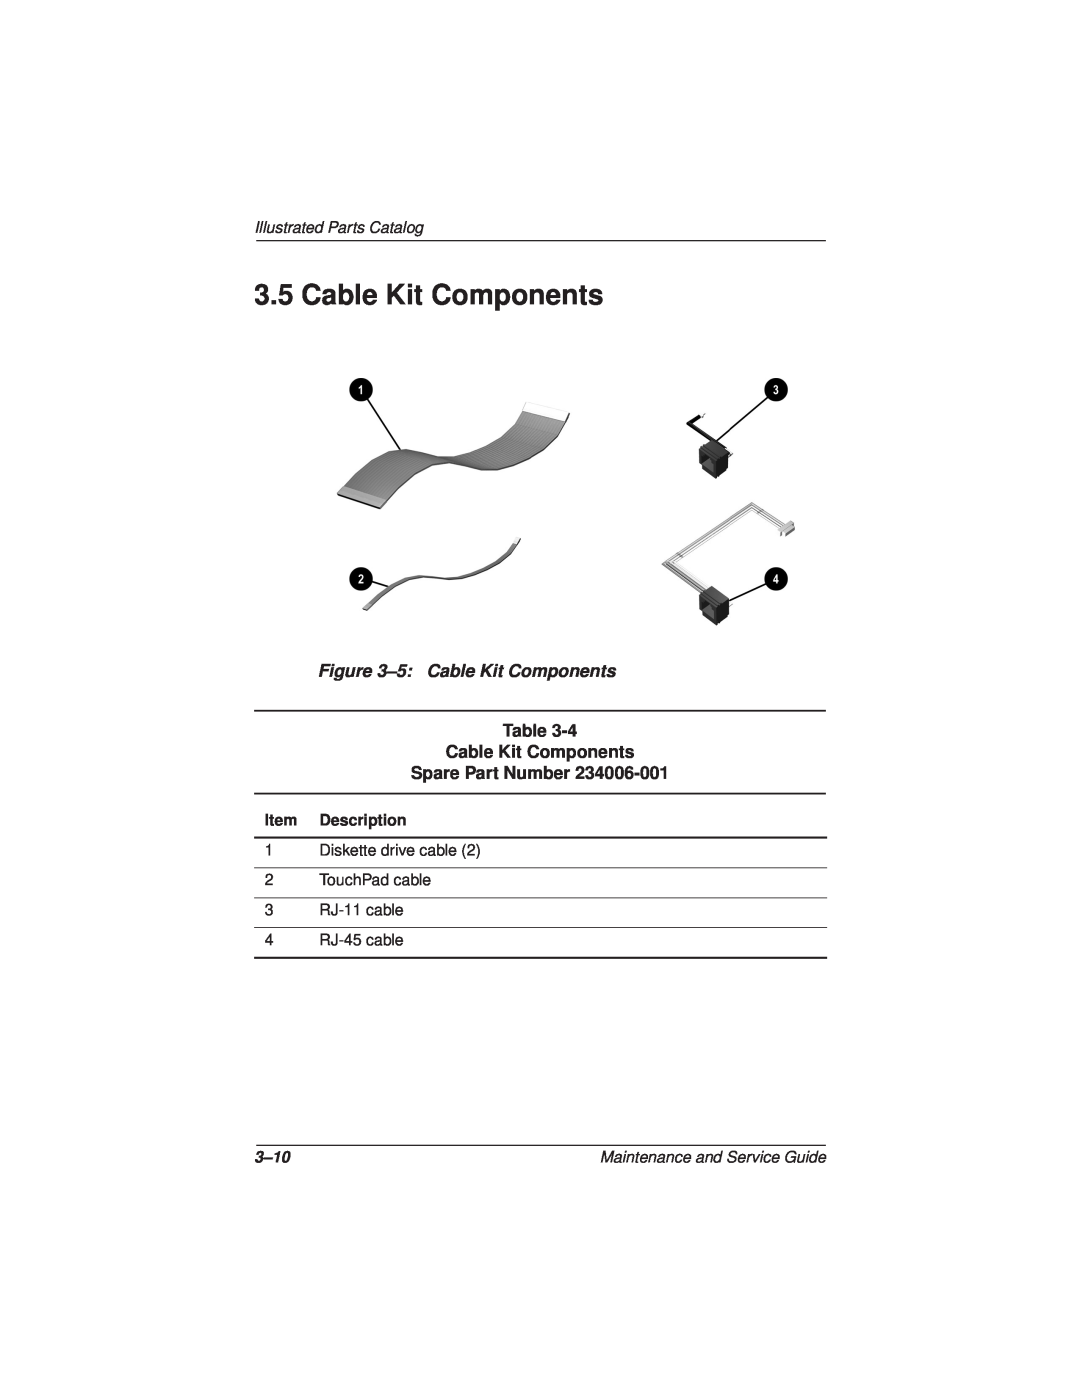 Compaq N110 manual 5 Cable Kit Components, Cable Kit Components Spare Part Number, Illustrated Parts Catalog, 3-10 